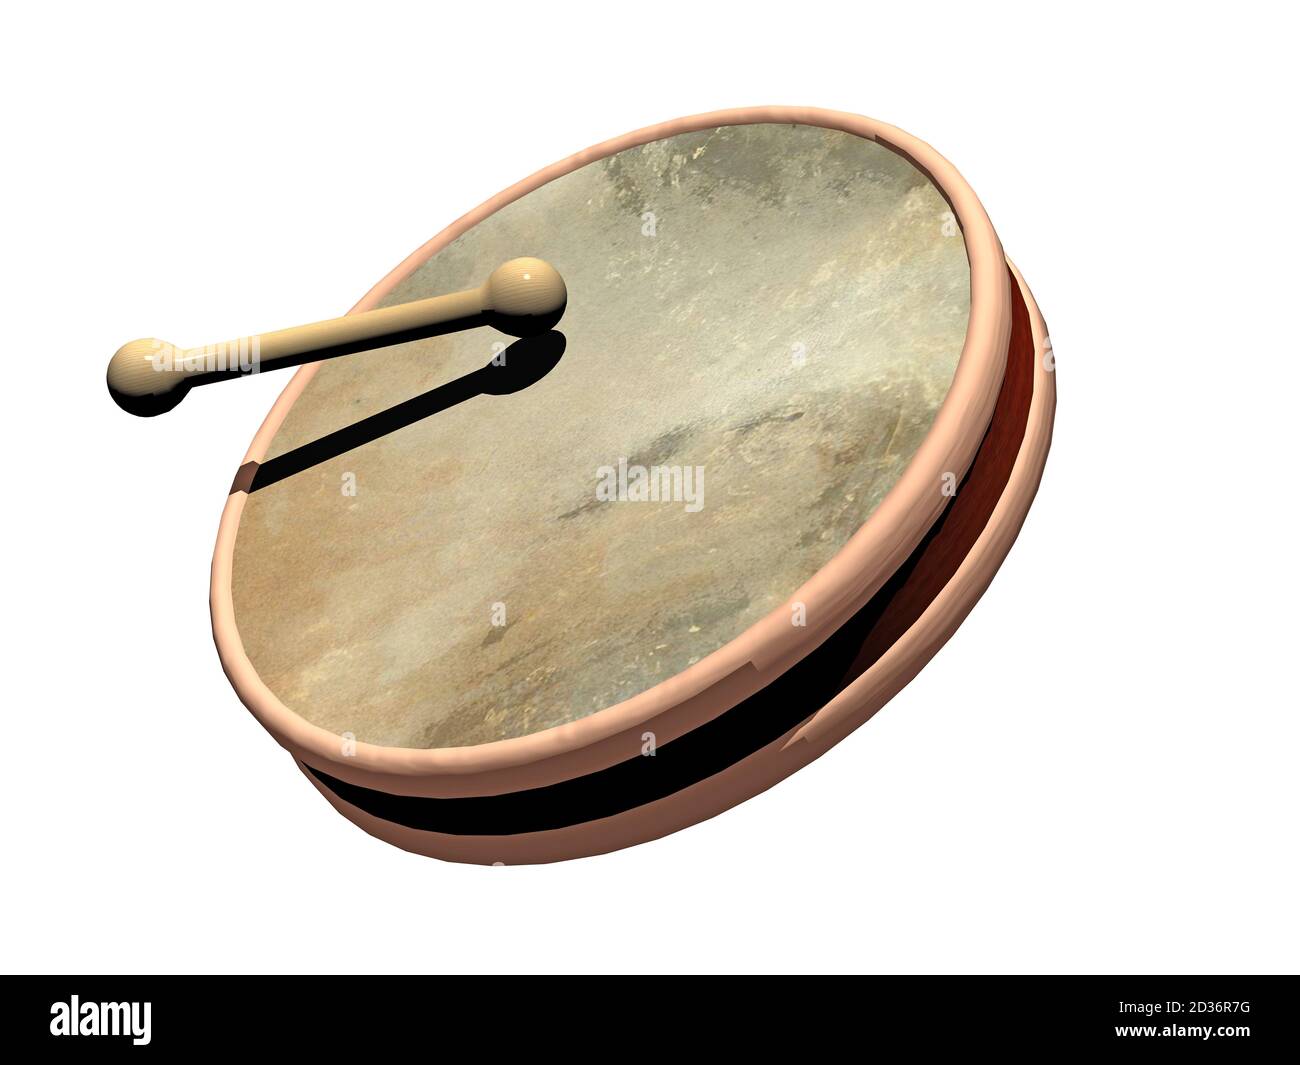 Drum with string and clapper Stock Photo - Alamy